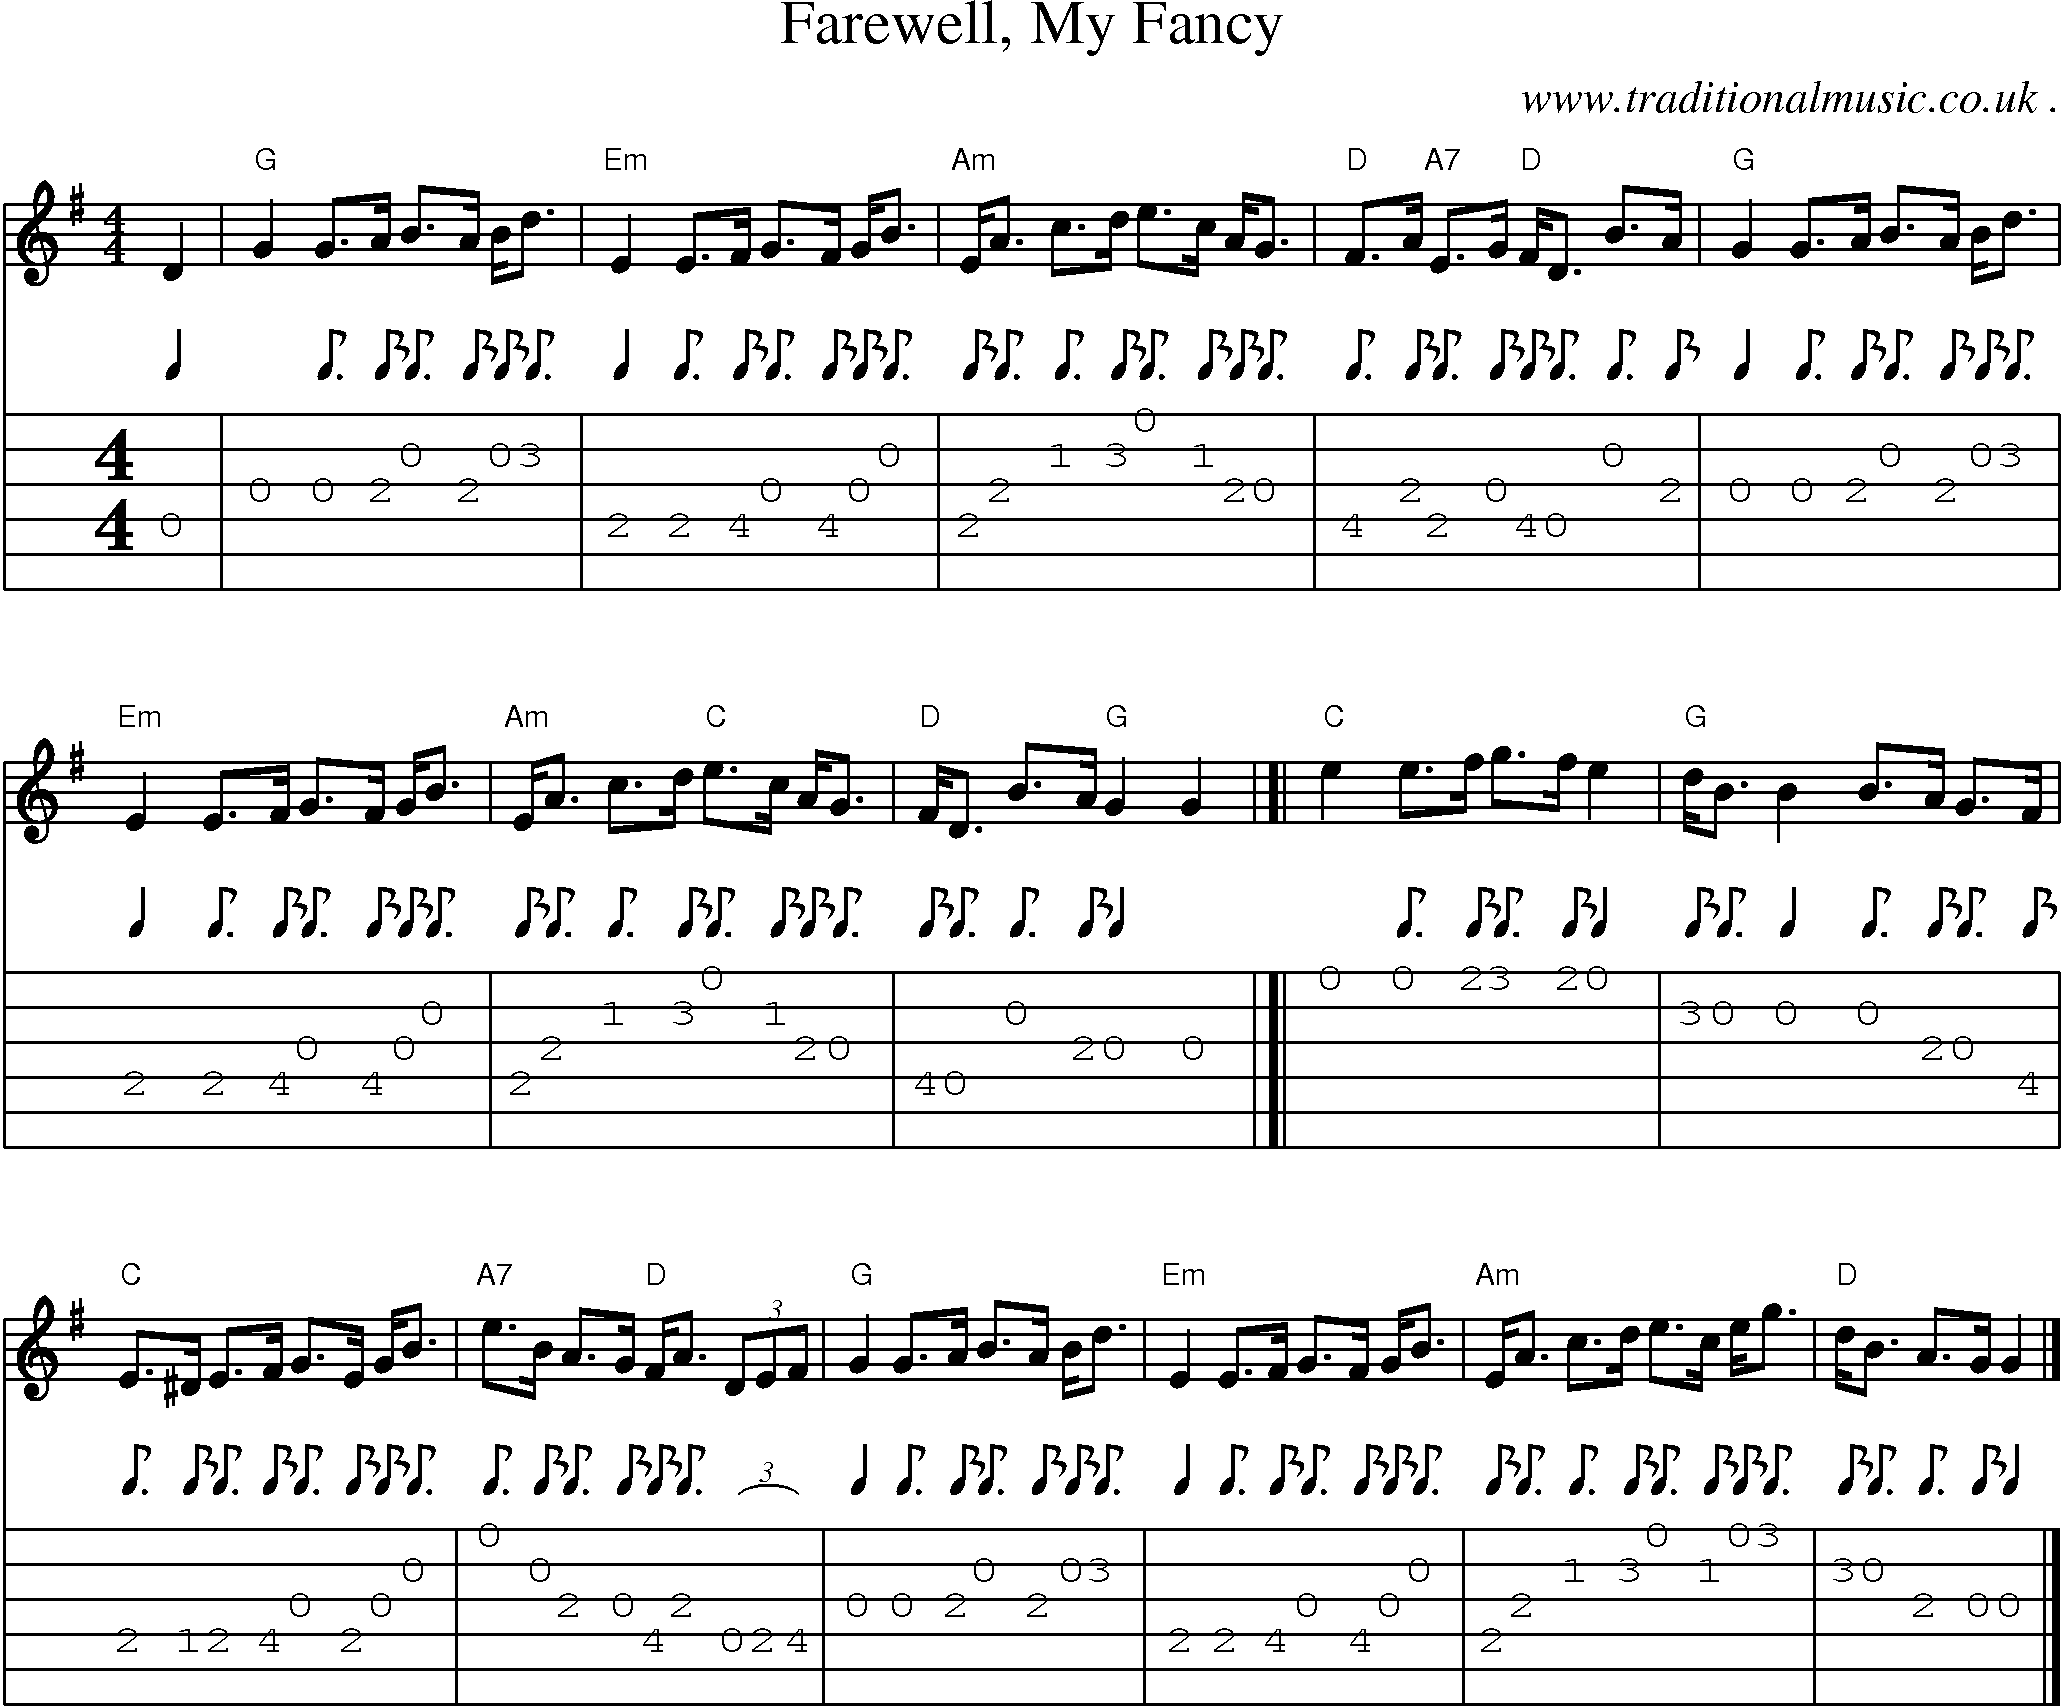 Sheet-music  score, Chords and Guitar Tabs for Farewell My Fancy